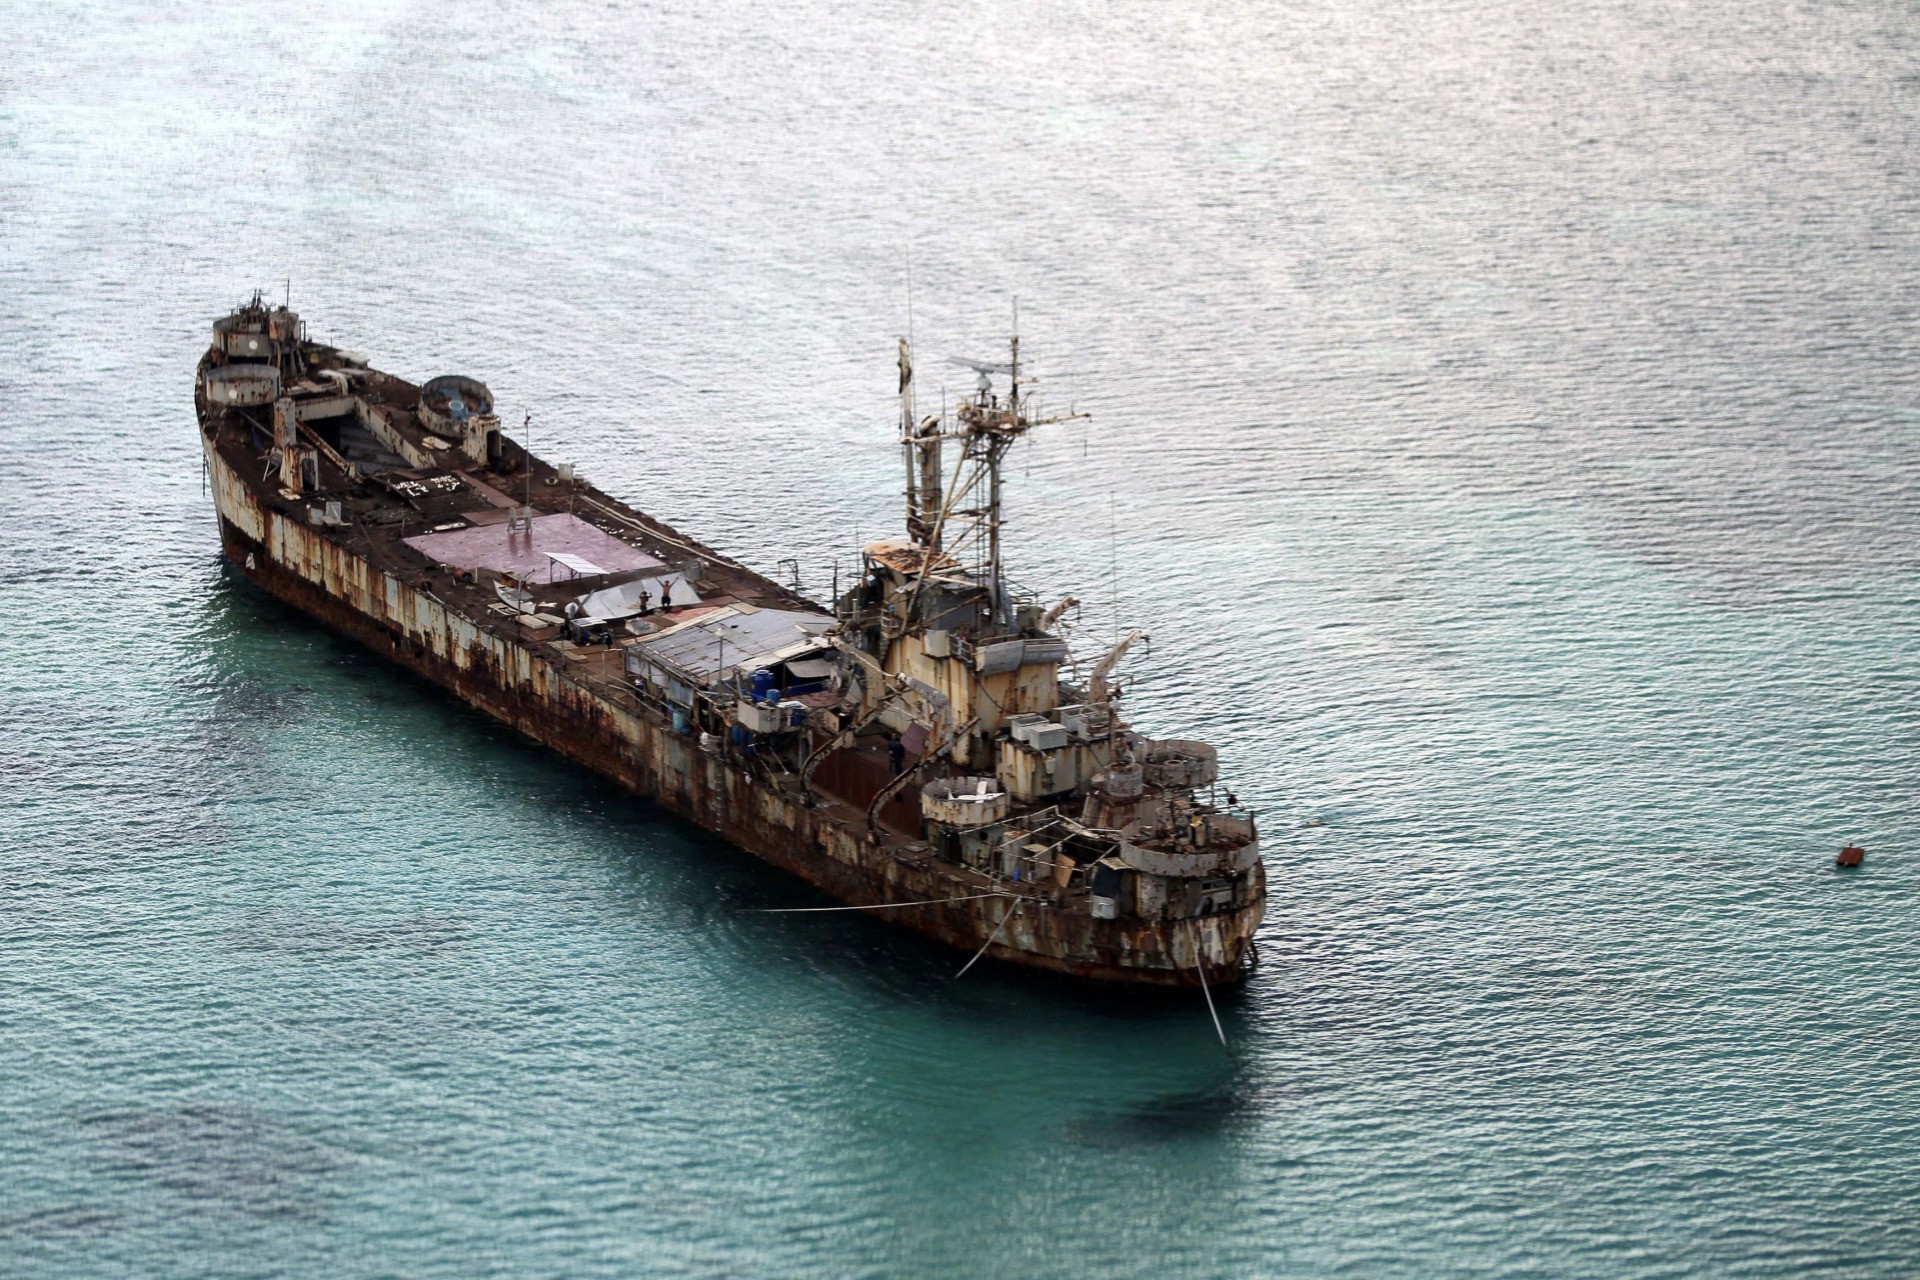 This areral photo taken through a glass window of a military plane shows the dilapidated Sierra Madre ship of the Philippine Navy anchored near Ayungin Shoal with Filipino soldiers onboard to secure perimeter in the Spratly Islands in the South China Sea on May 11, 2015. Chinese coast guard ships blocked and used water cannons on two Philippine supply boats heading to a disputed shoal occupied by Filipino marines in the South China Sea, provoking an angry protest against China and a warning from the Philippine government that its vessels are covered under a mutual defense treaty with the U.S., Manila’s top diplomat said Thursday, Nov. 18, 2021. (Ritchie B. Tongo/Pool Photo via AP, File)